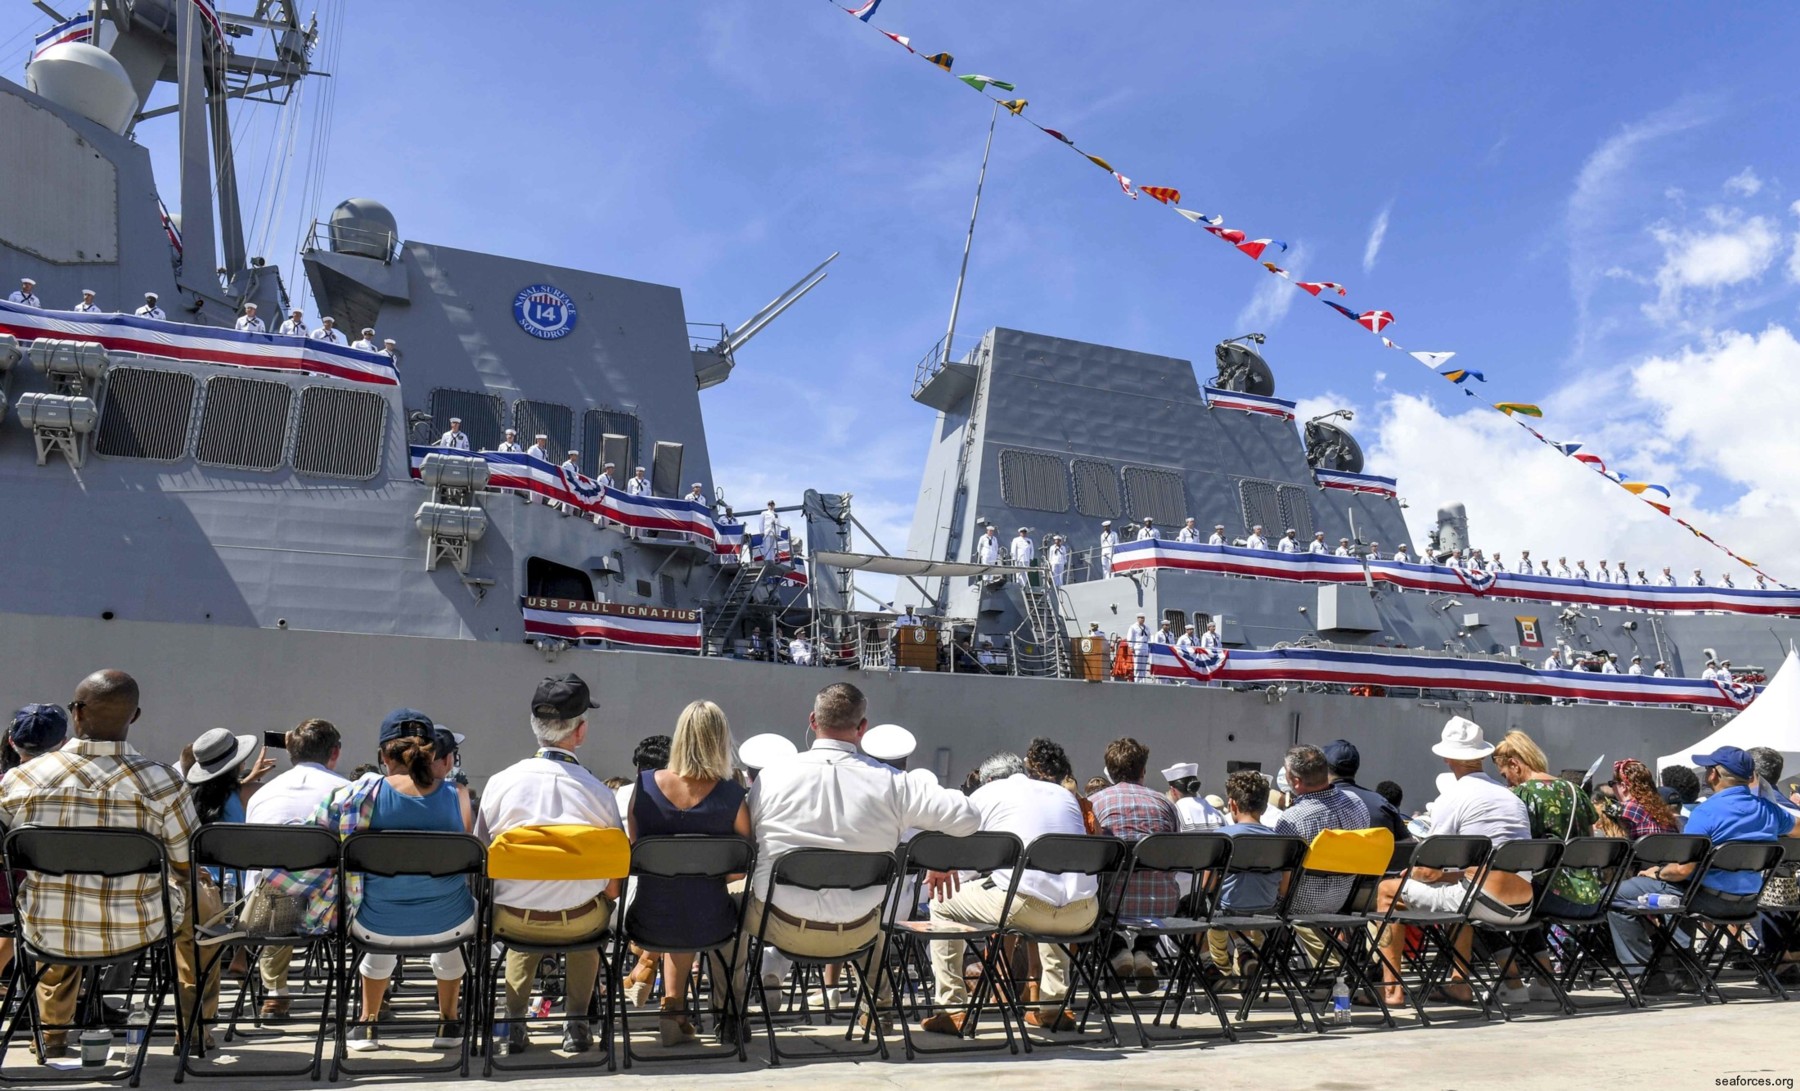 ddg-117 uss paul ignatius arleigh burke class guided missile destroyer us navy aegis 09 commissioning ceremony